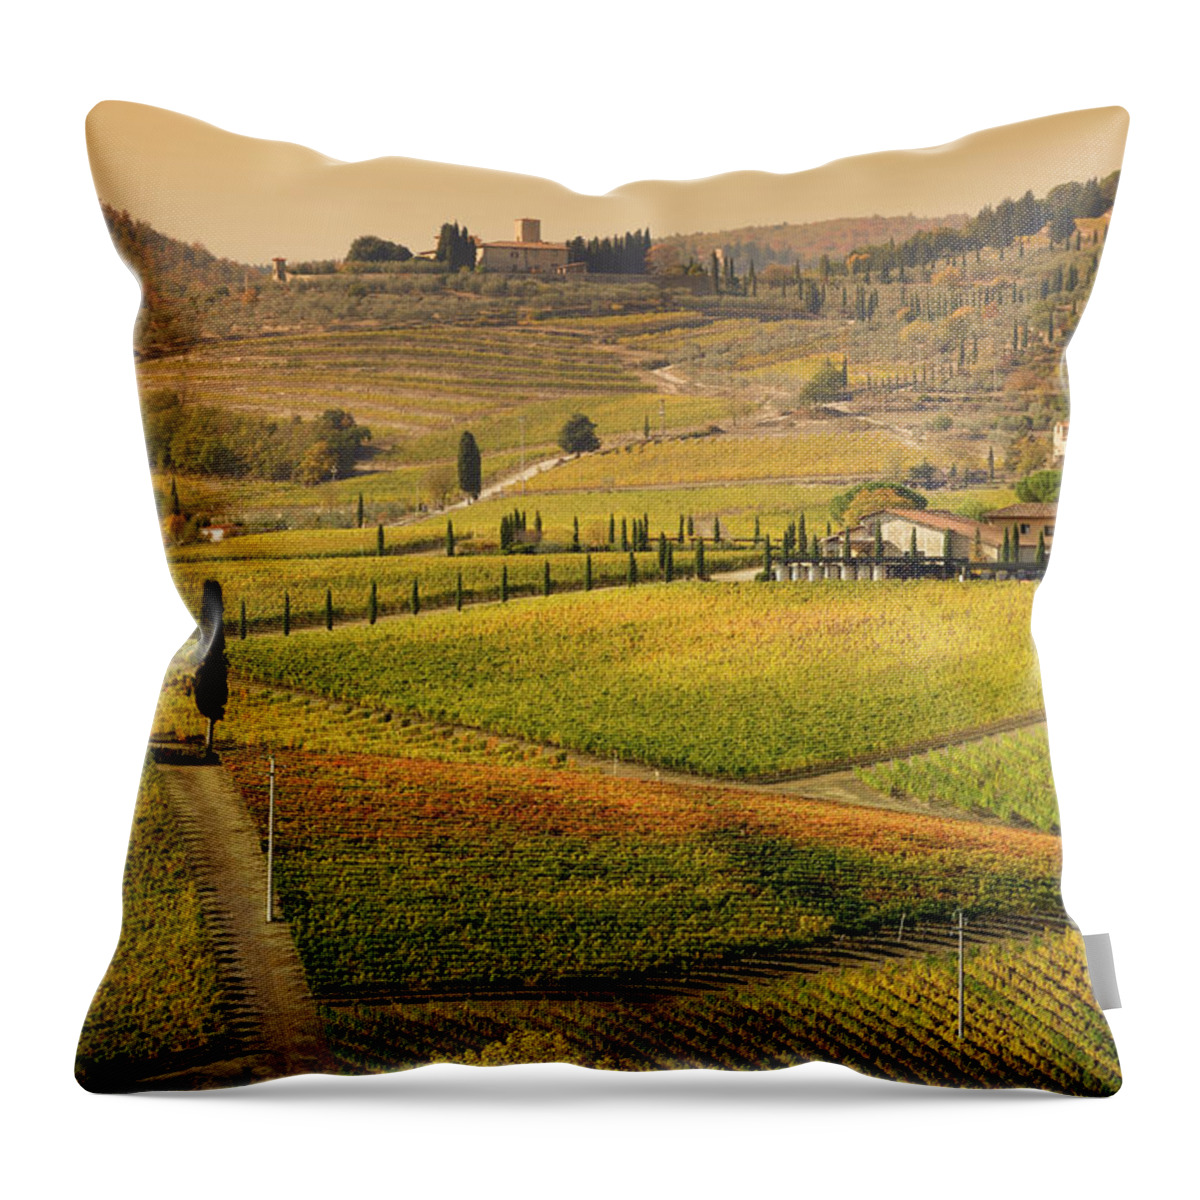 Scenics Throw Pillow featuring the photograph Tuscany Farmhouse And Vineyard In Fall by Lisa-blue